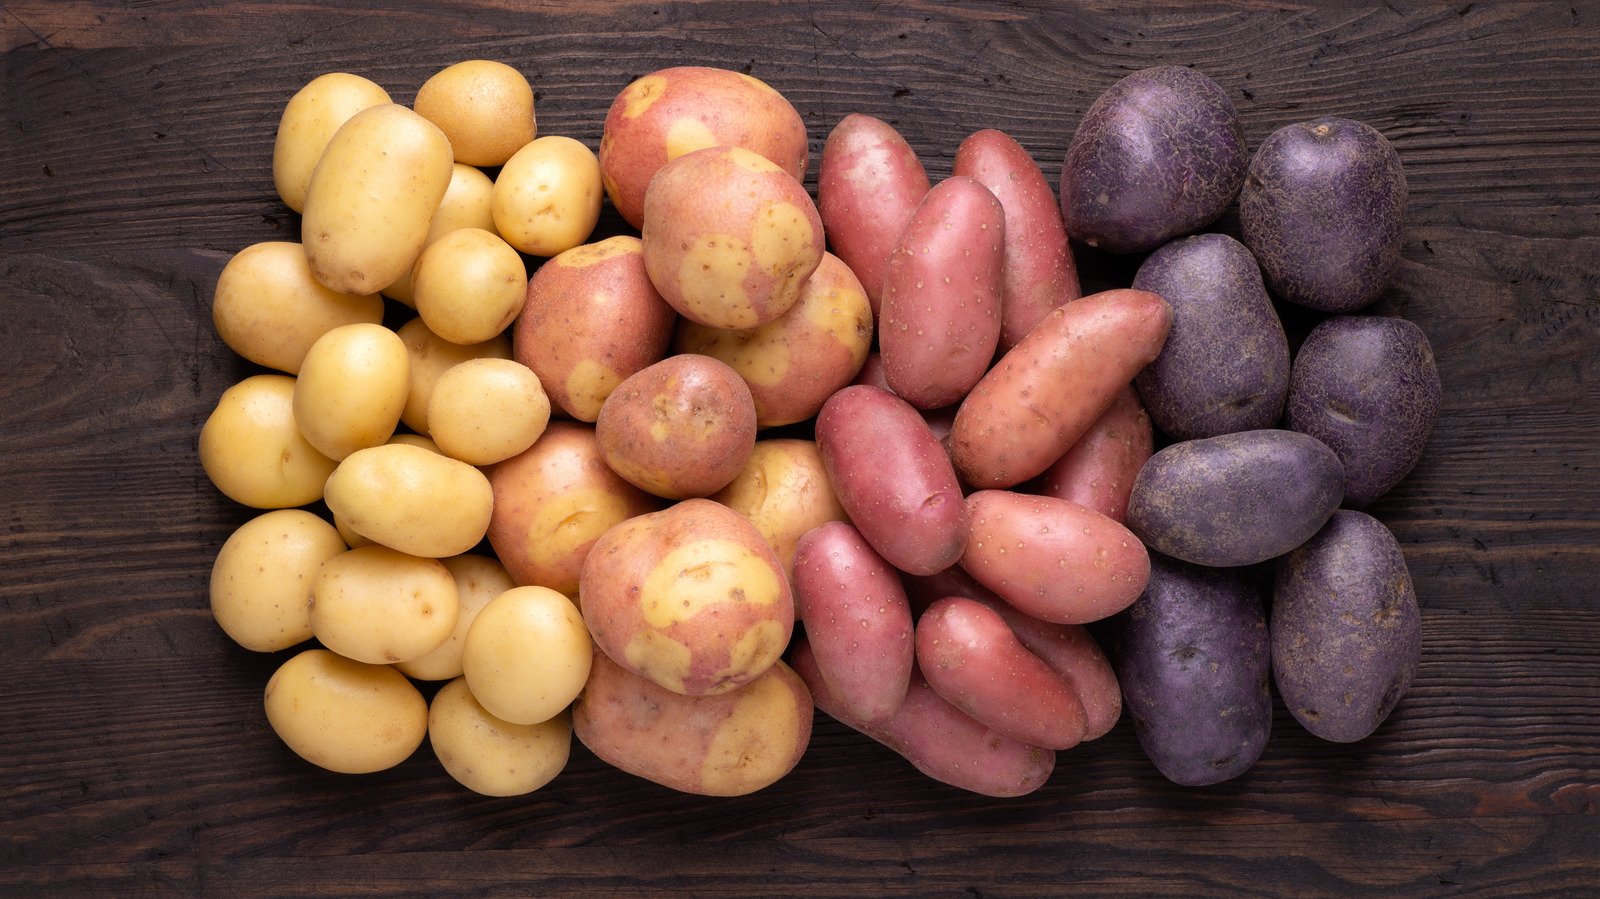 Everything You Ever Wondered About Potatoes